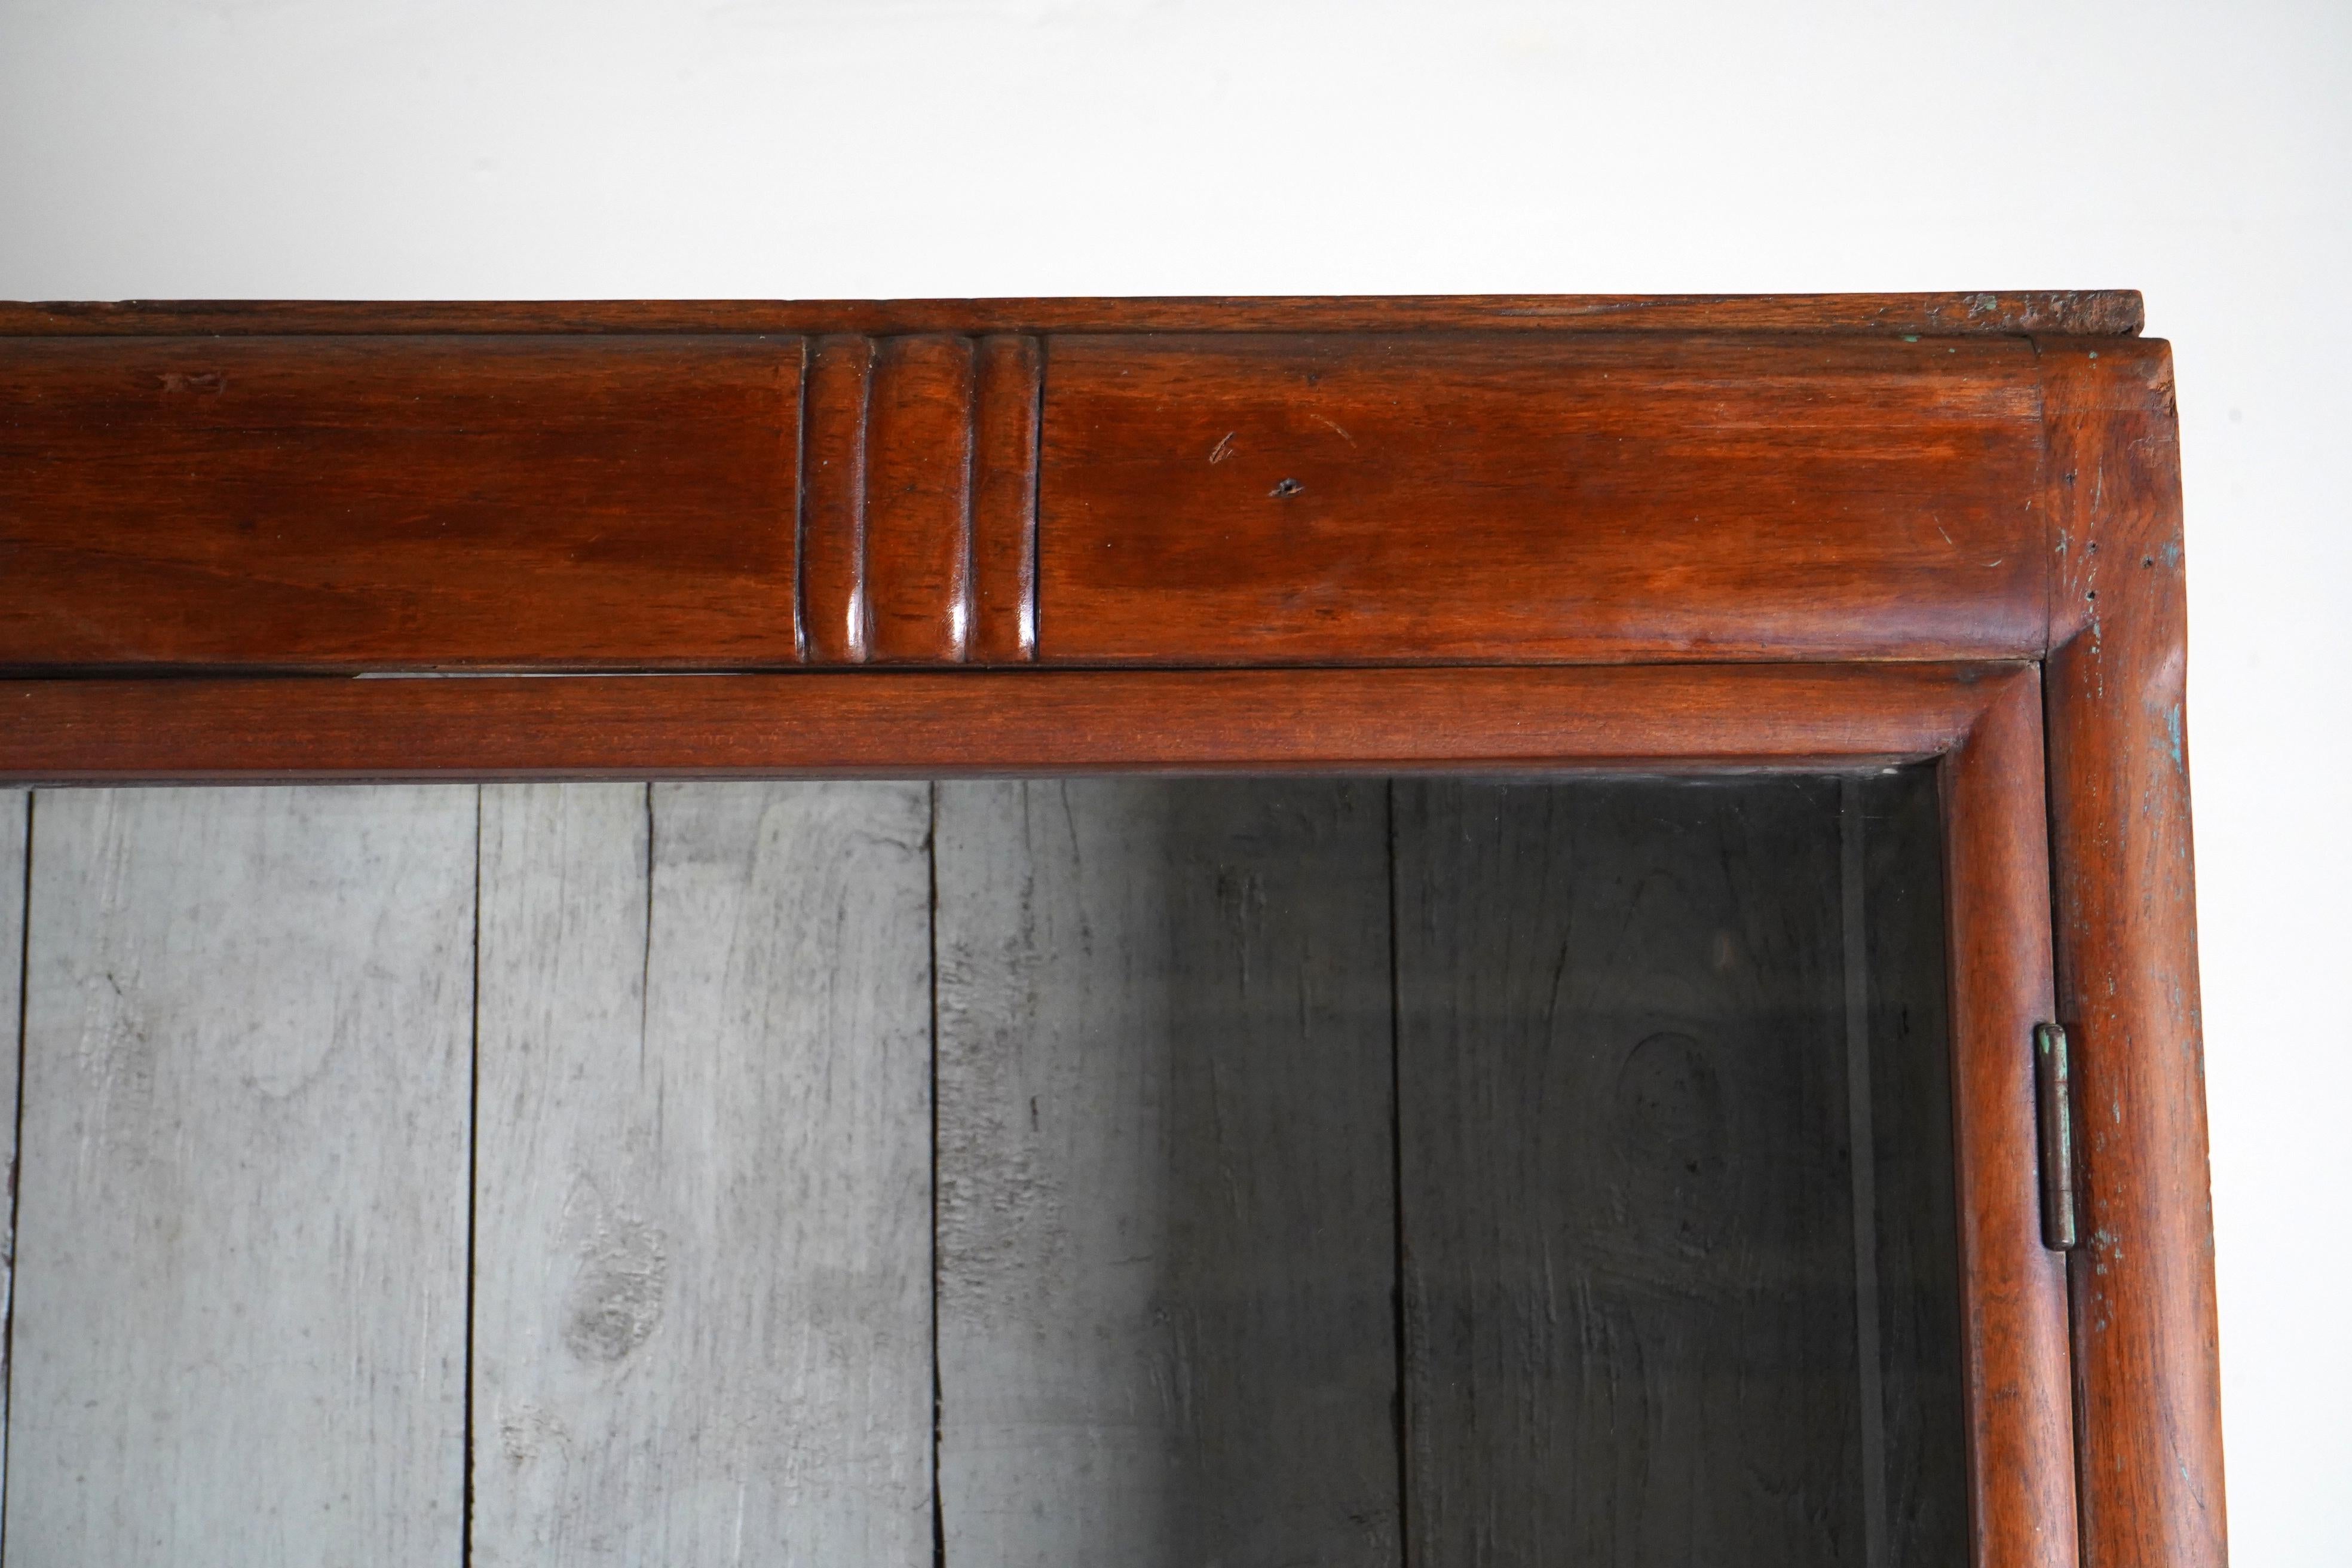 A British Colonial Art Deco Teak Bookcase with Lower Storage  For Sale 4